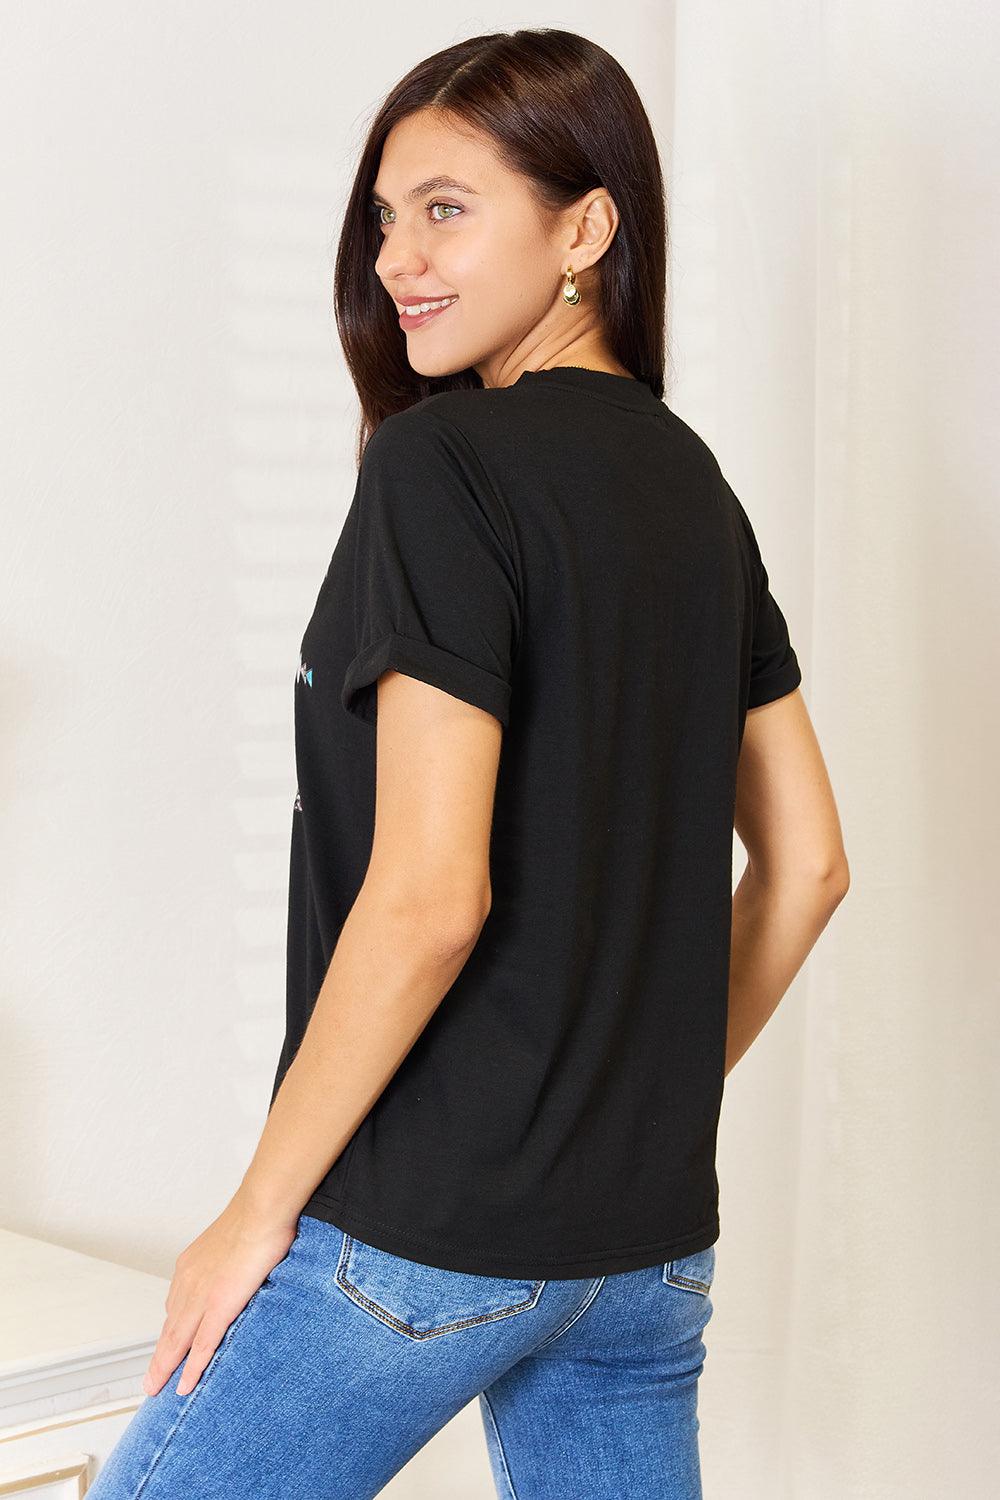 Simply Love Graphic Short Sleeve T-Shirt - Anchored Feather Boutique